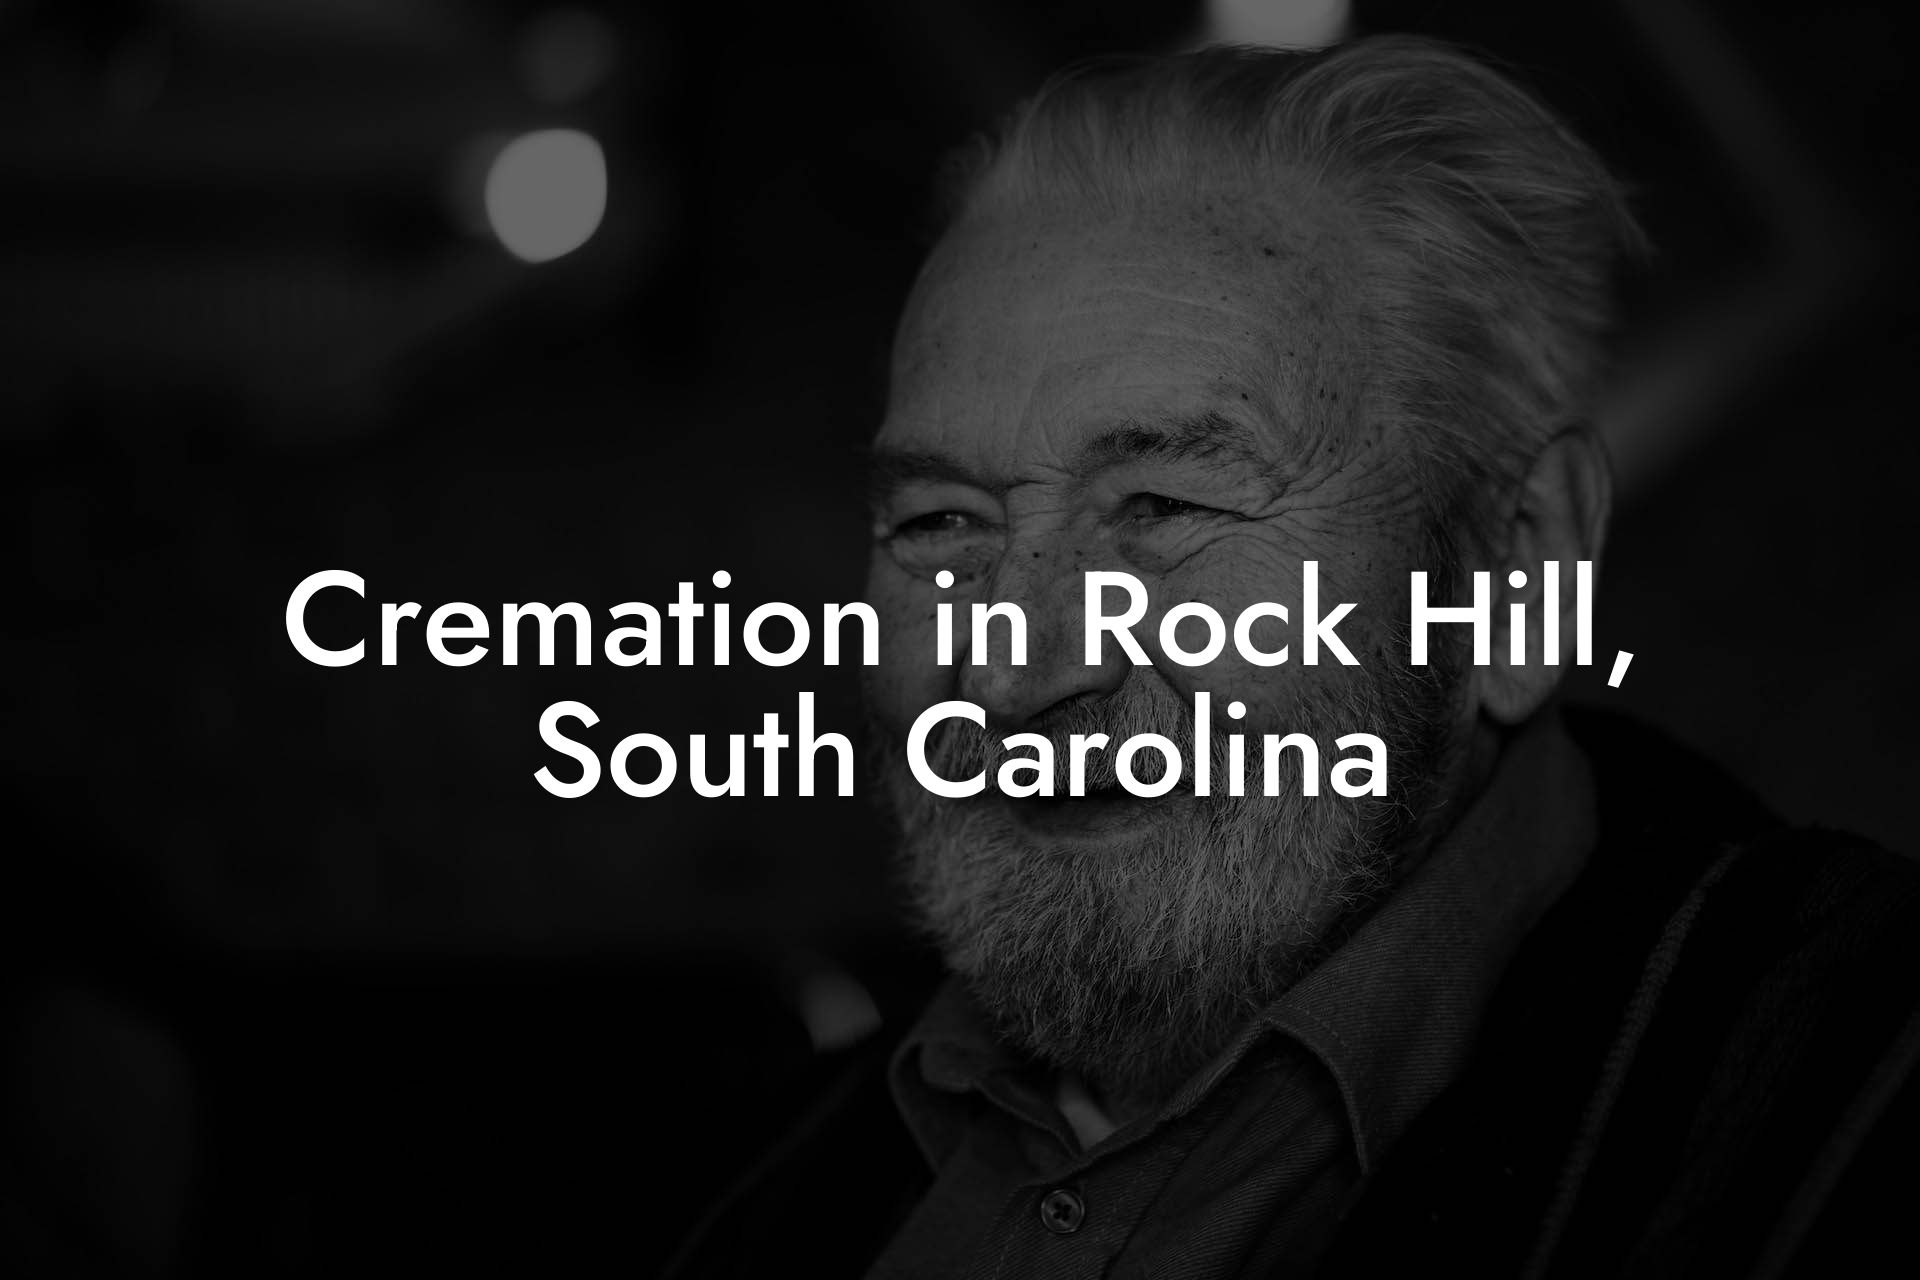 Cremation in Rock Hill, South Carolina